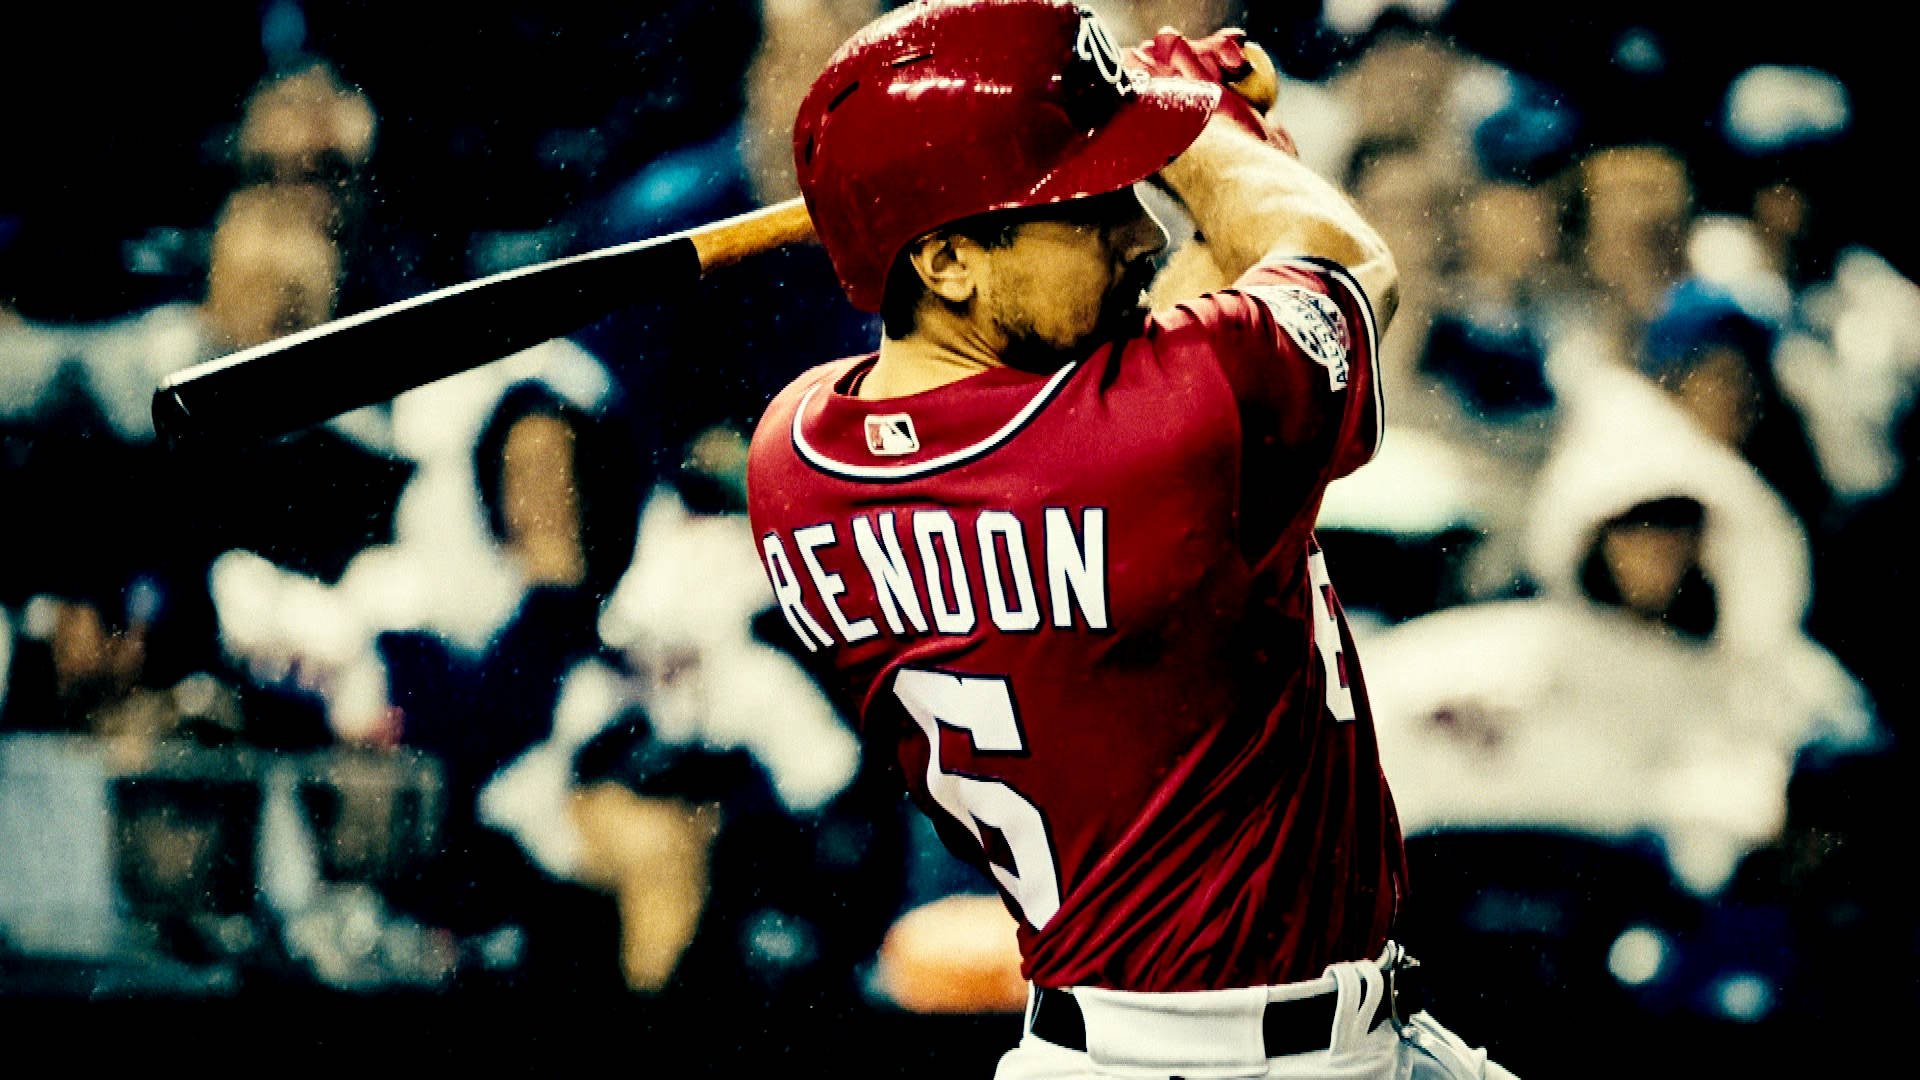 Photo Of Anthony Rendon Swinging With Vintage Filter Background